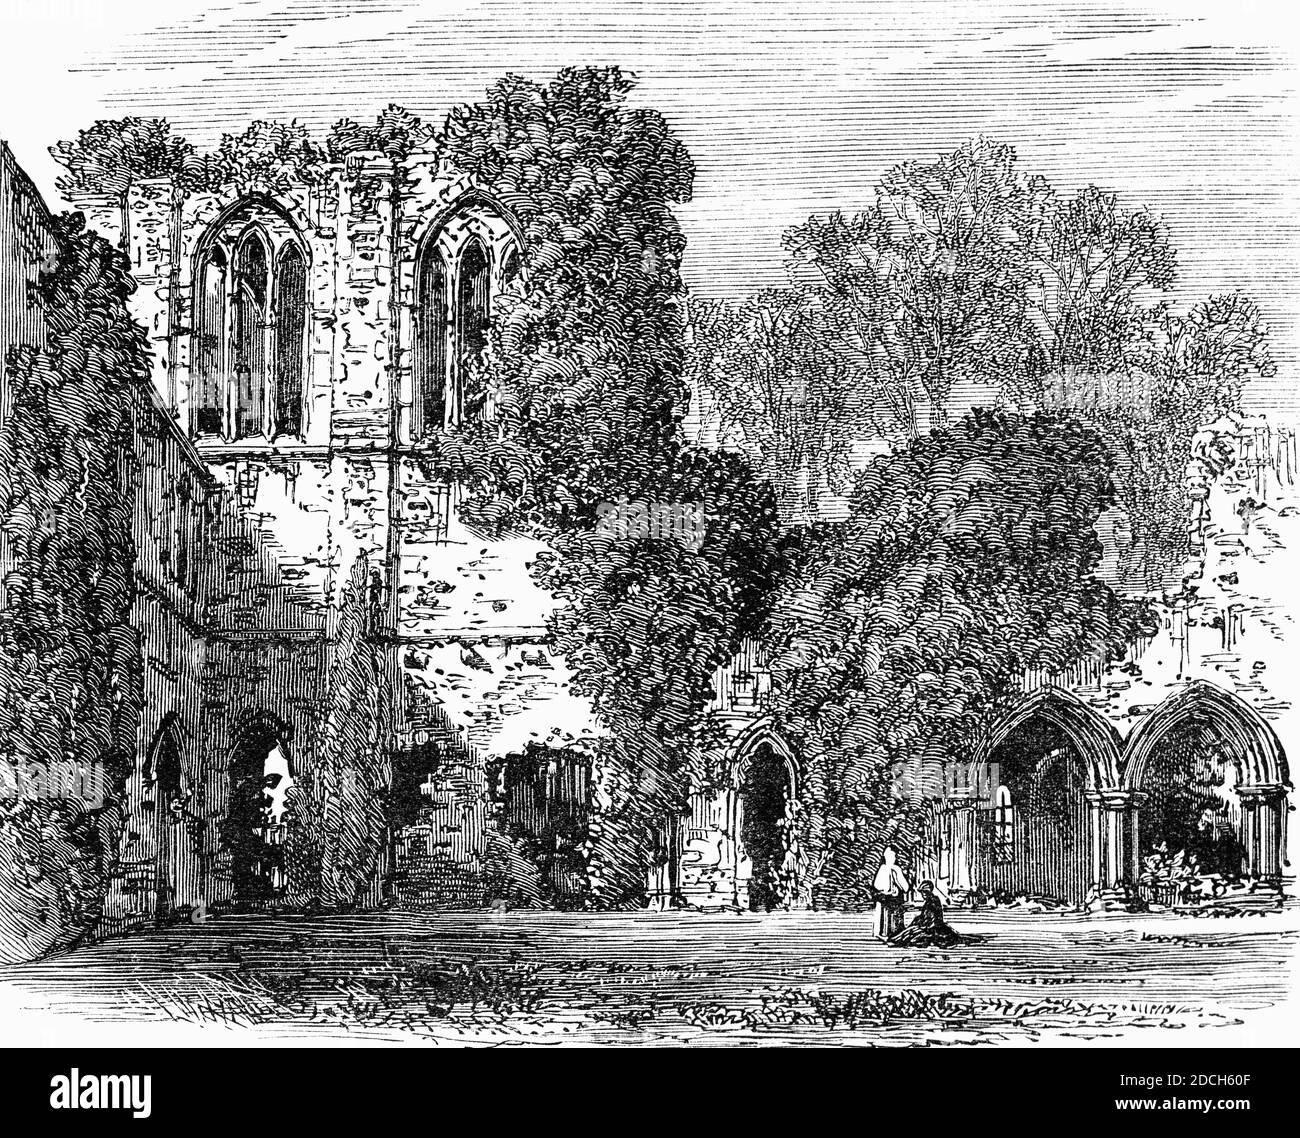 A 19th Century view of Netley Abbey, a ruined late medieval monastery in the village of Netley near Southampton in Hampshire, England. The abbey was founded in 1239 as a house for monks of the austere Cistercian order, but despite royal patronage, Netley was never rich, produced no influential scholars nor churchmen, and its nearly 300-year history was quiet. Stock Photo